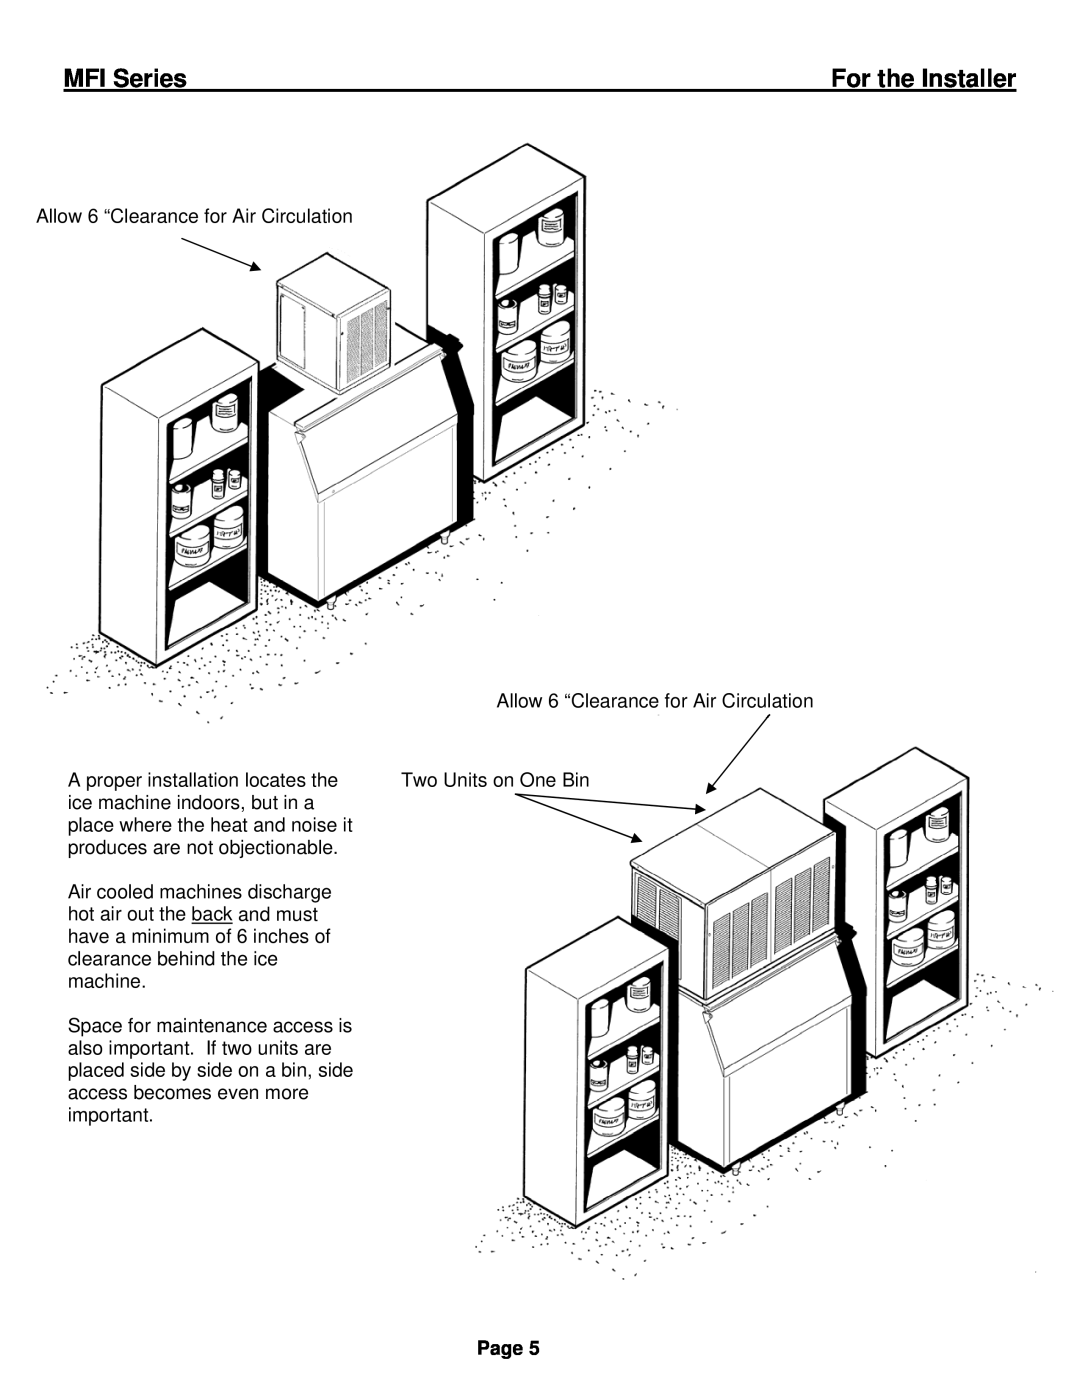 Ice-O-Matic installation manual MFI Series, For the Installer, Allow 6 “Clearance for Air Circulation, Page 